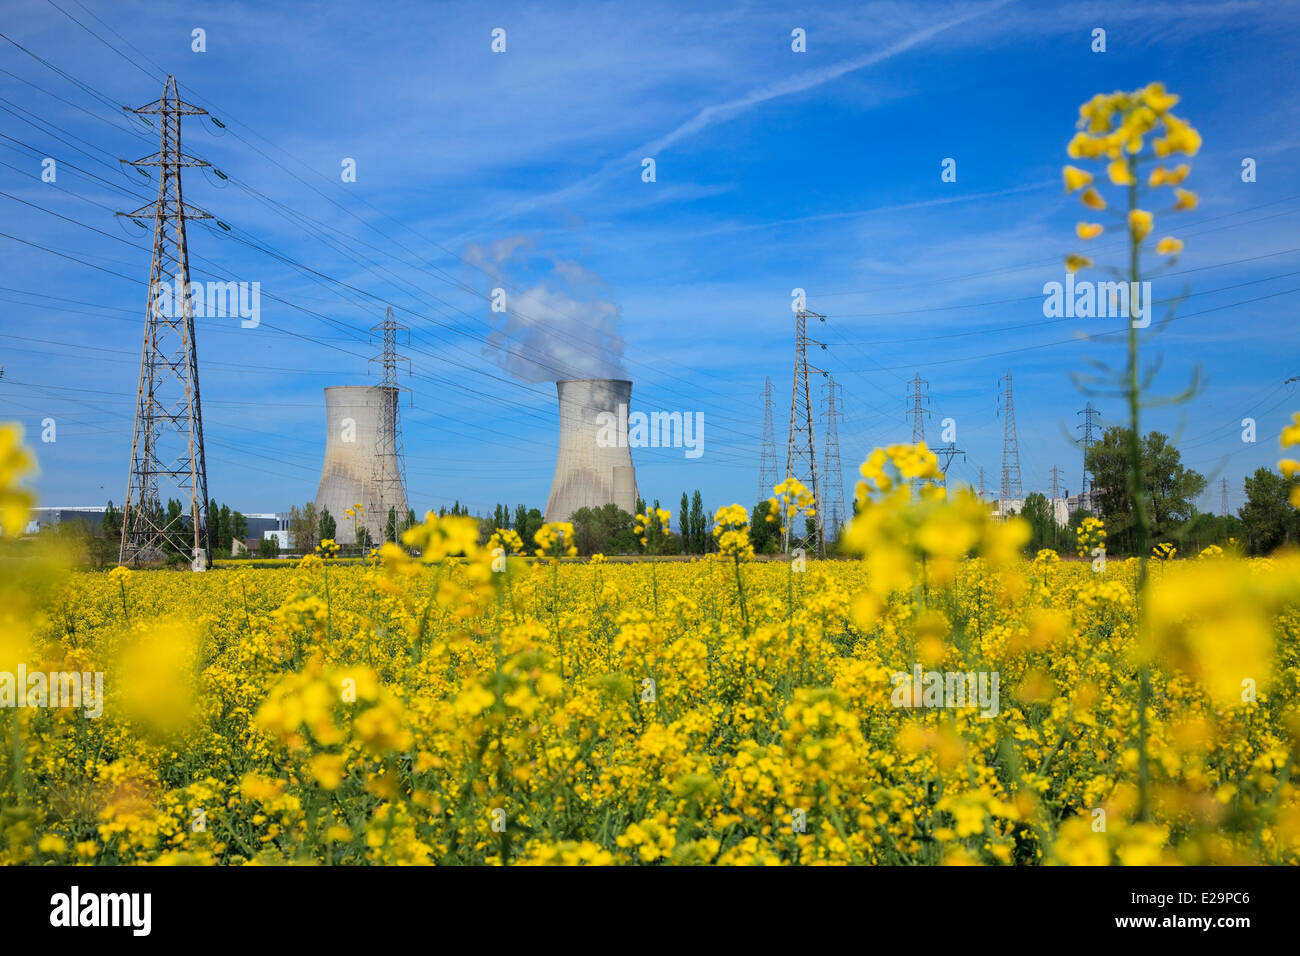 France, Drome, Tricastin industrial nuclear site, cooling tower of Eurodif uranium enrichment plant operated by Areva and Stock Photo